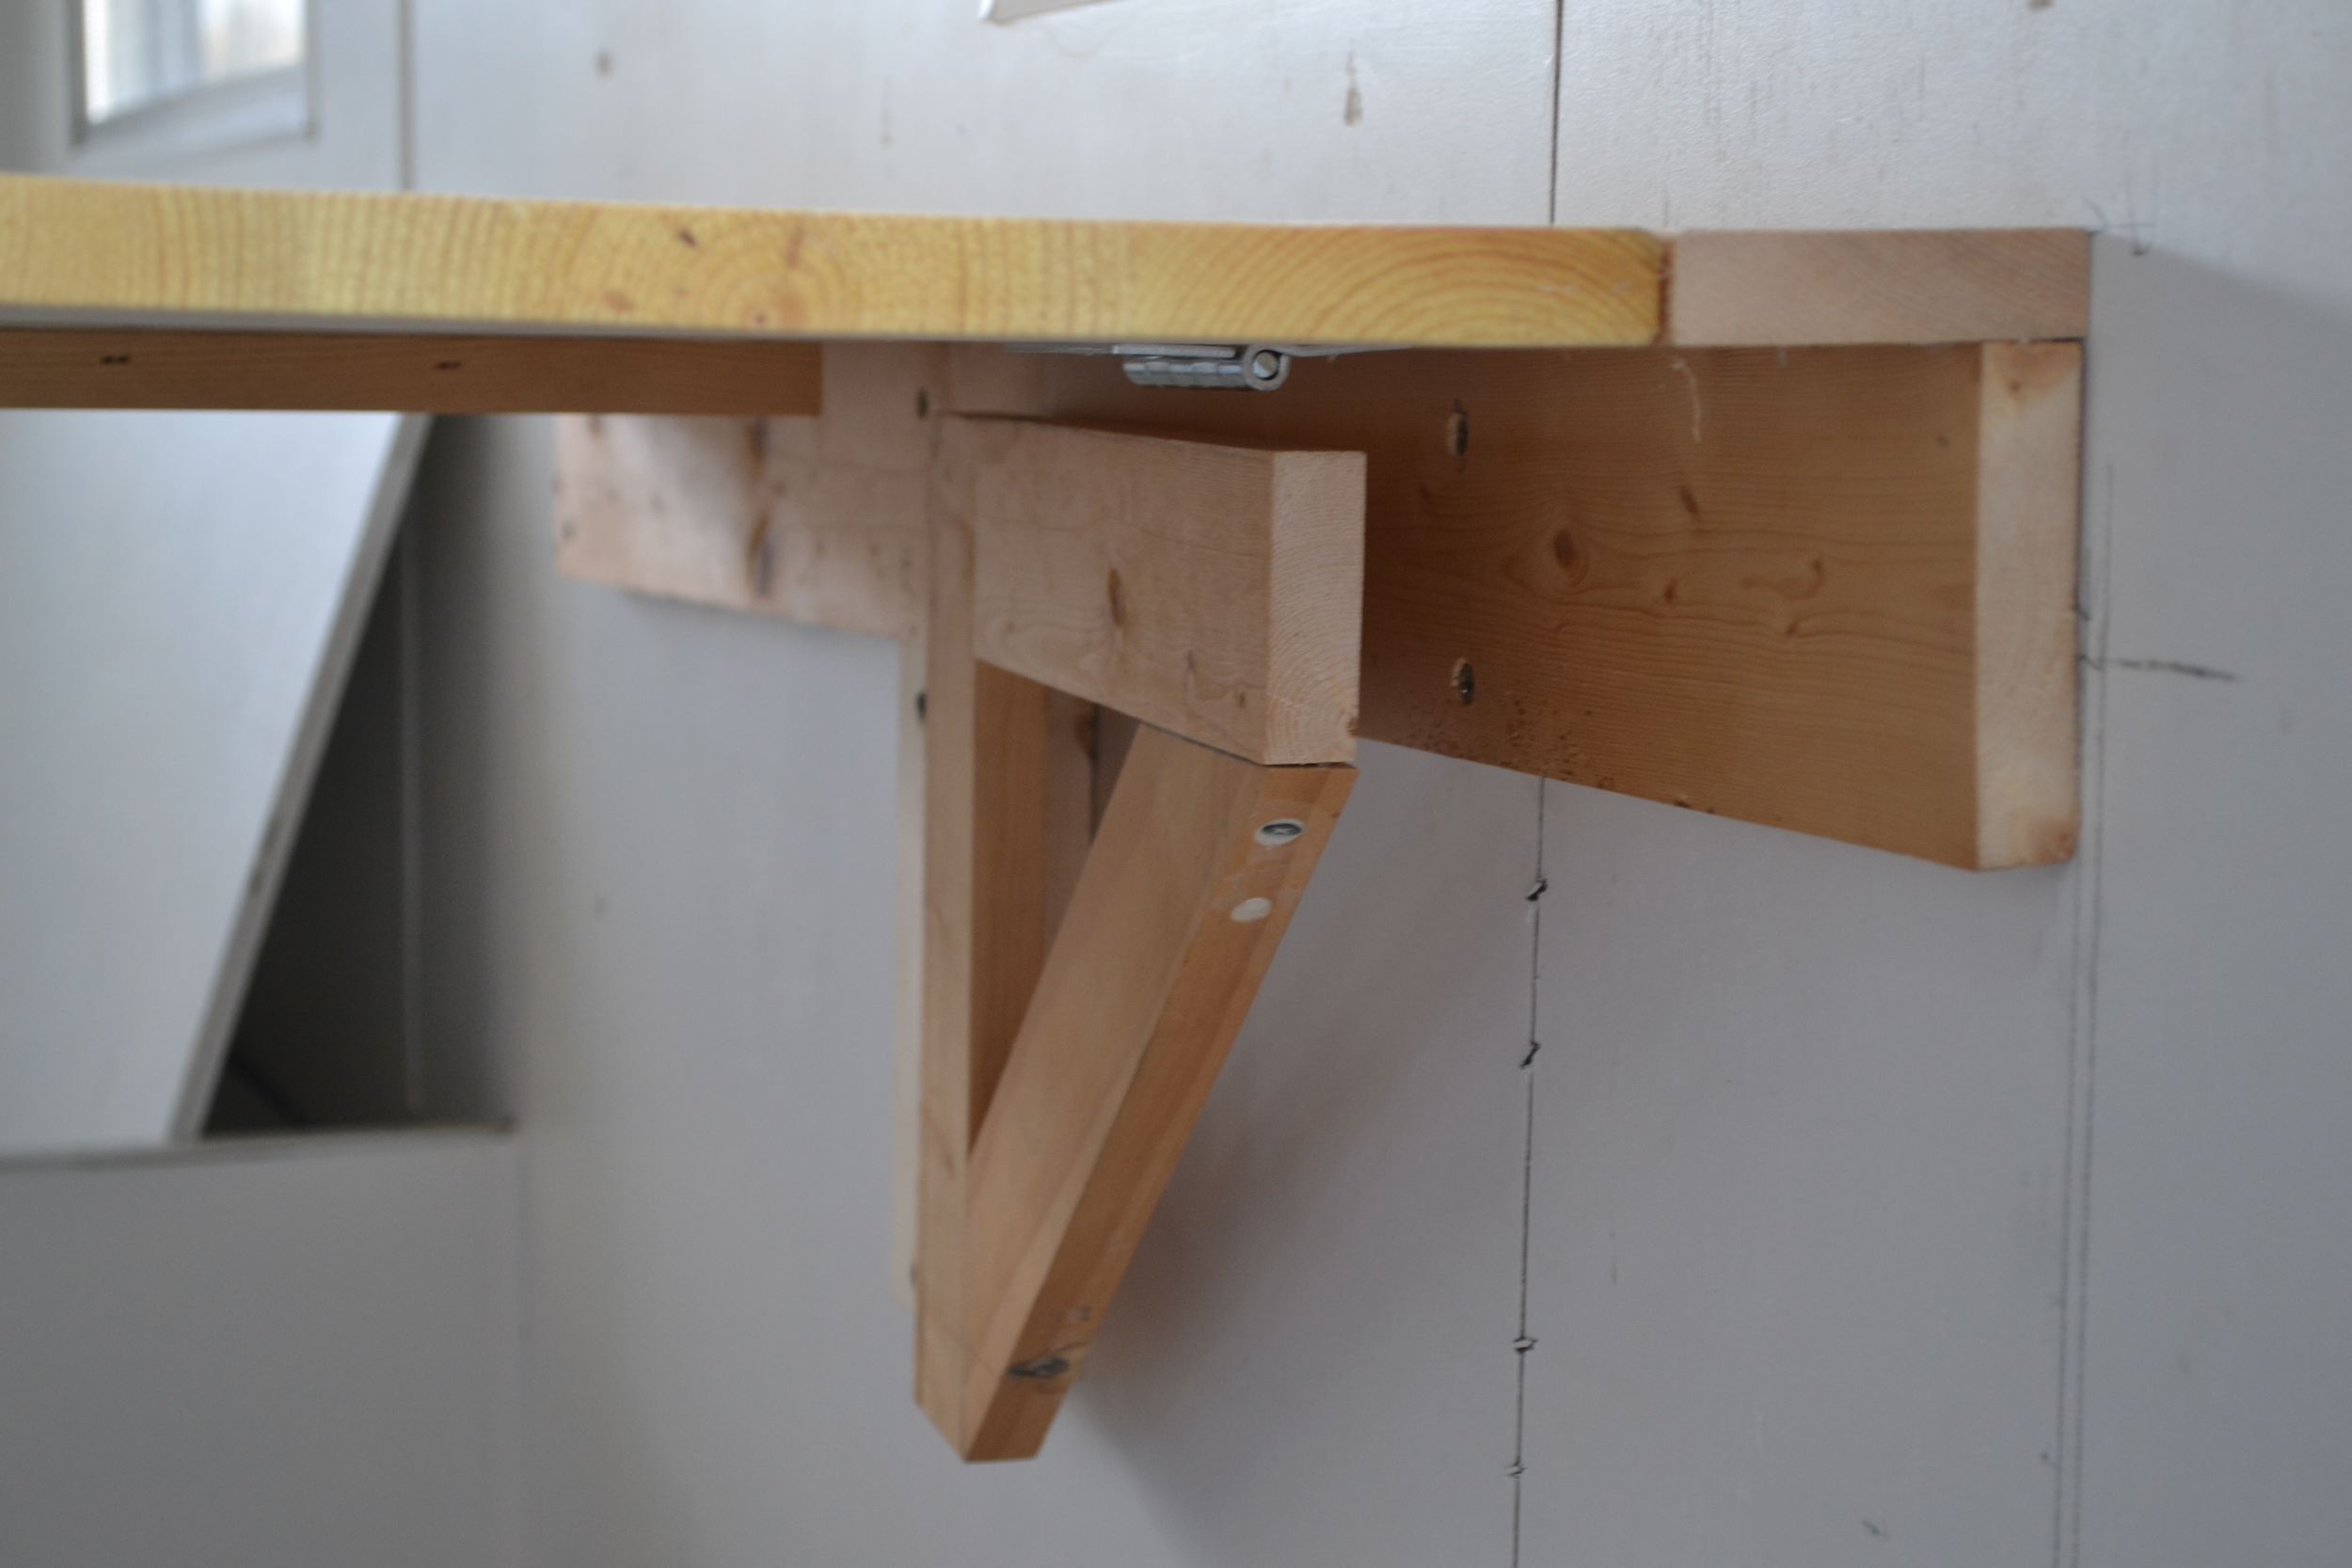 Forget Ikea Build Your Own Folding, How To Build A Wall Mounted Fold Up Desk Ikea